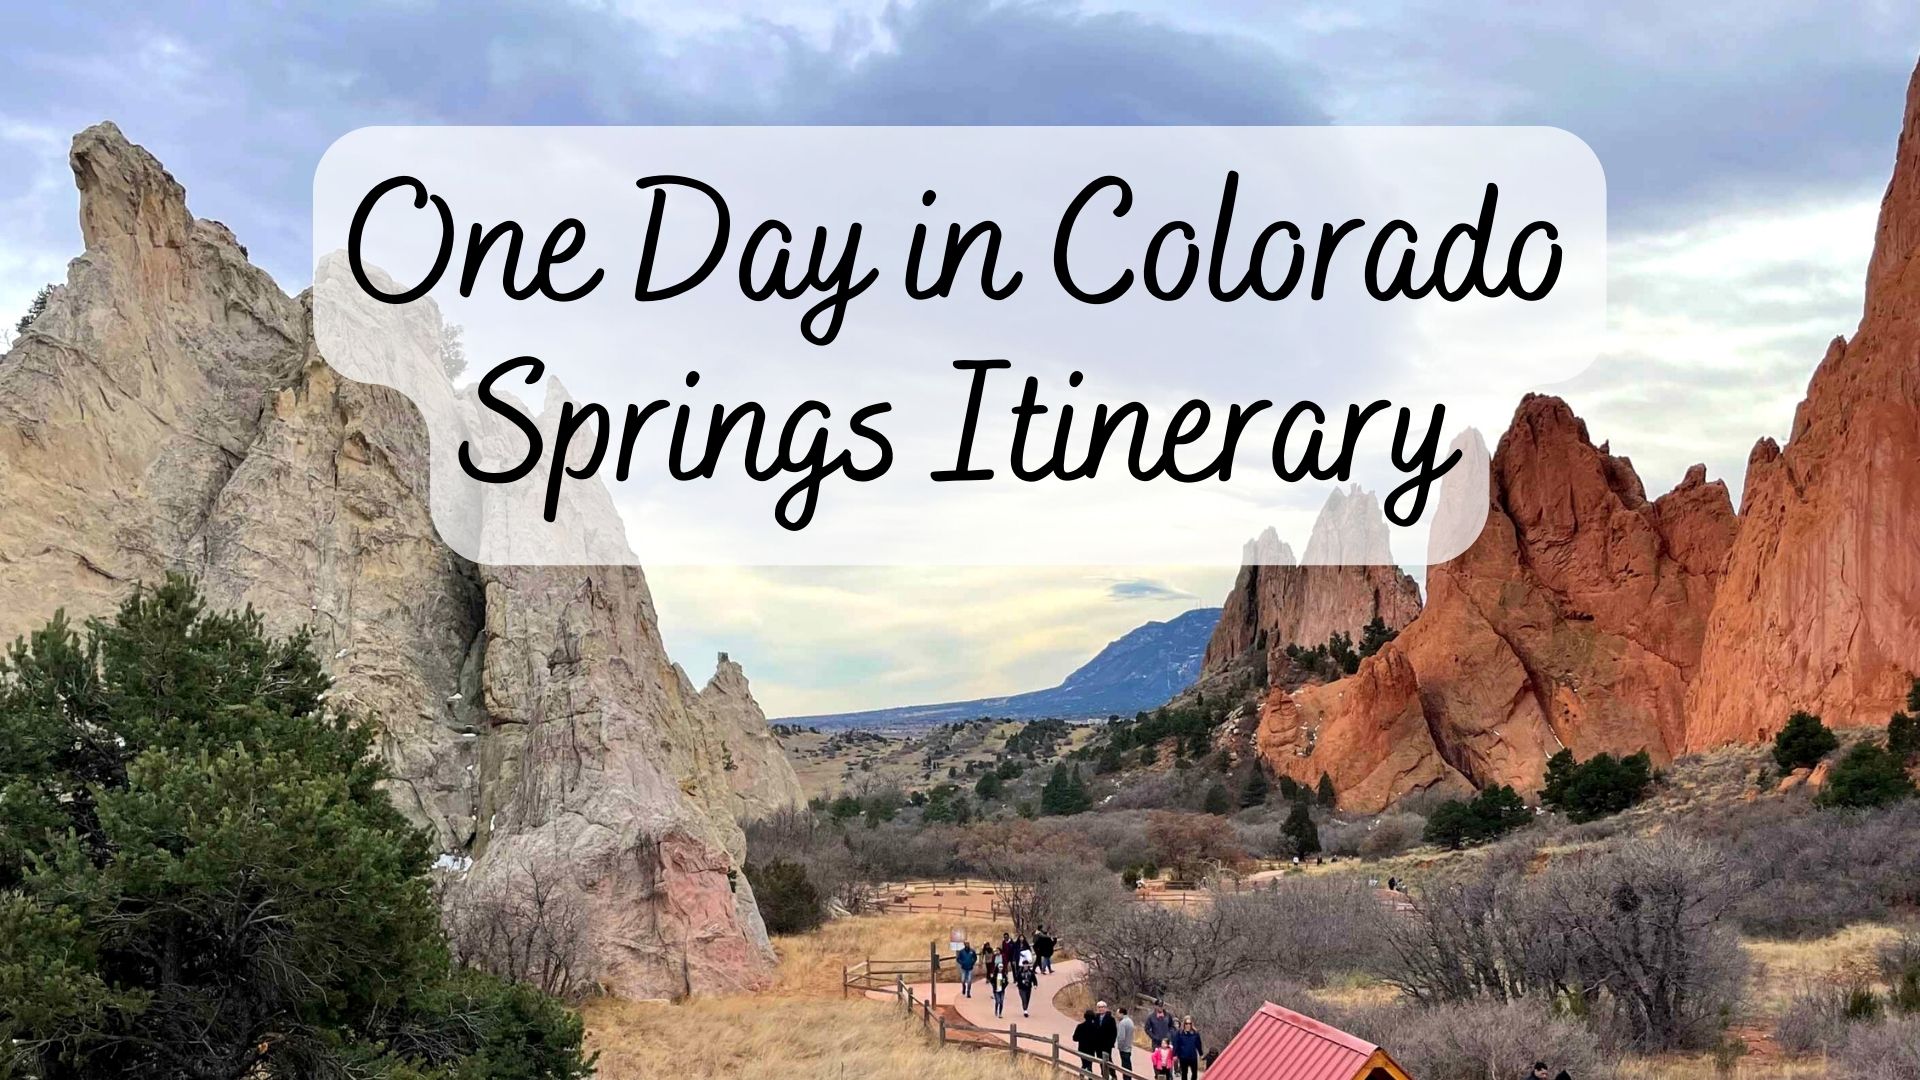 One Day in Colorado Springs itinerary, one day in Colorado Springs, Colorado Springs day trip, Colorado Springs itinerary, Colorado, Garden of the Gods, Pikes Peak